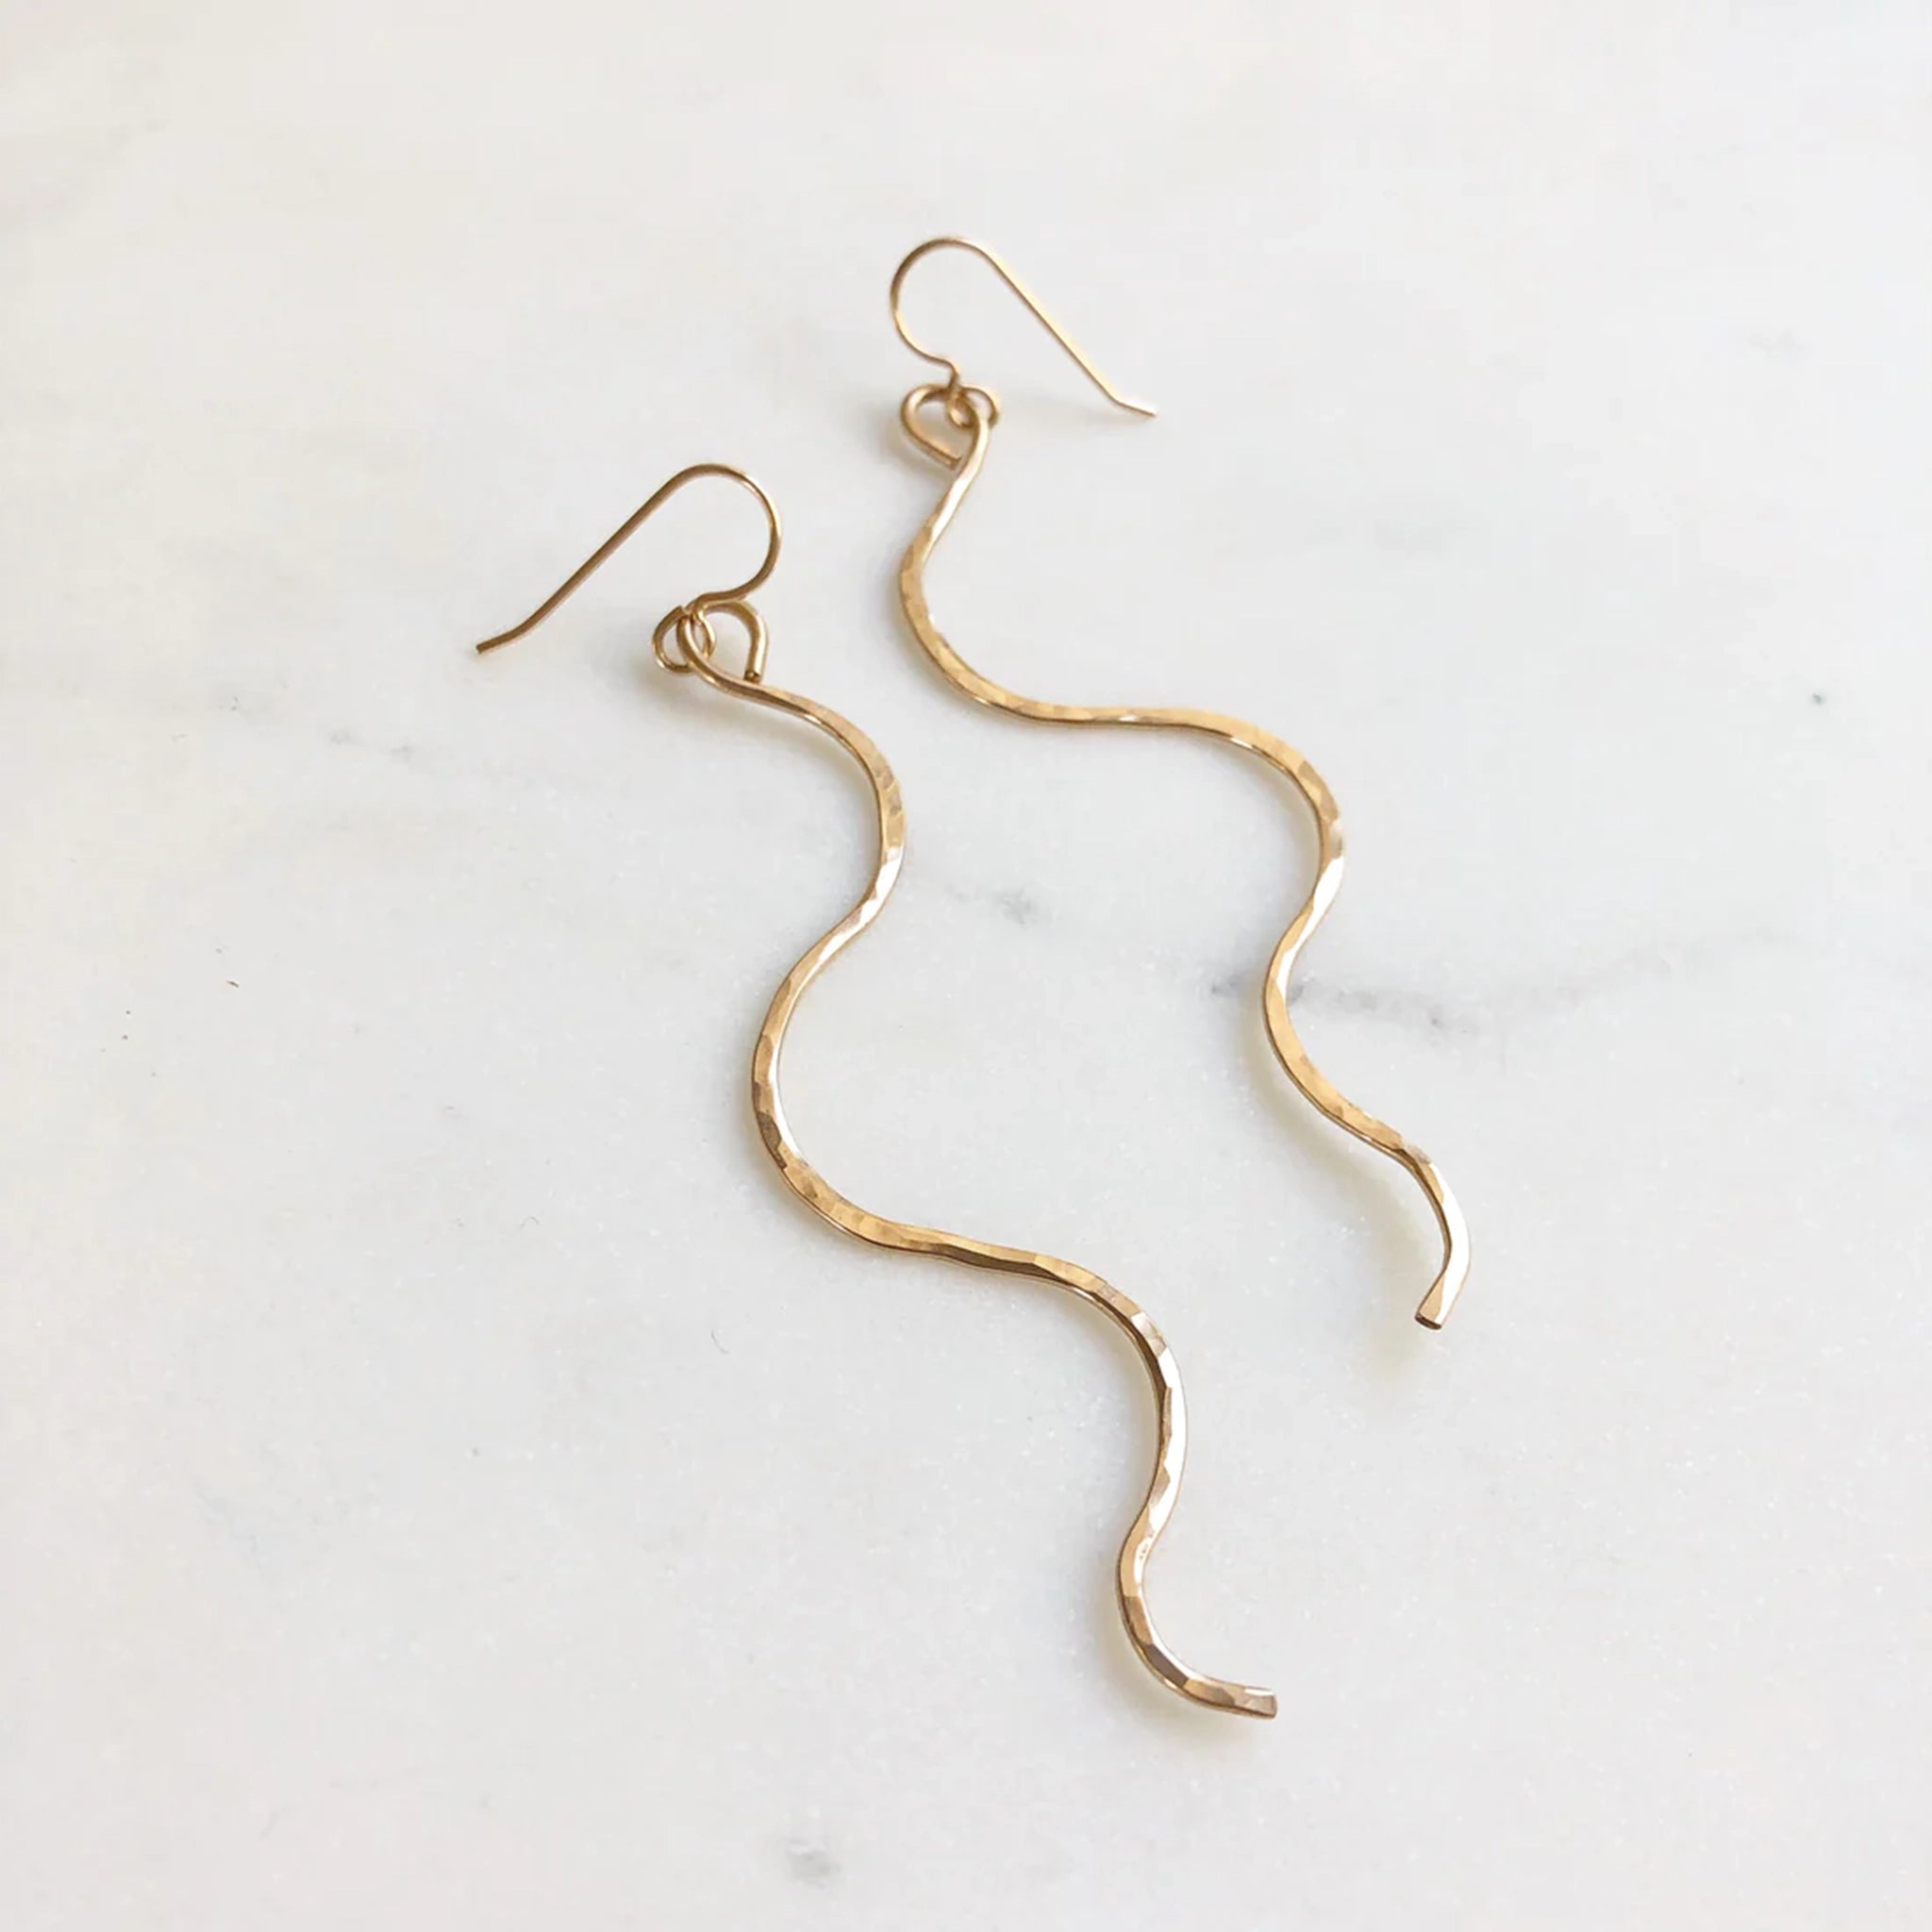 Two thin gold dangle earrings in a wavy &quot;serpent like&quot; shape with a hook earring back and a lightly hammered texture. 